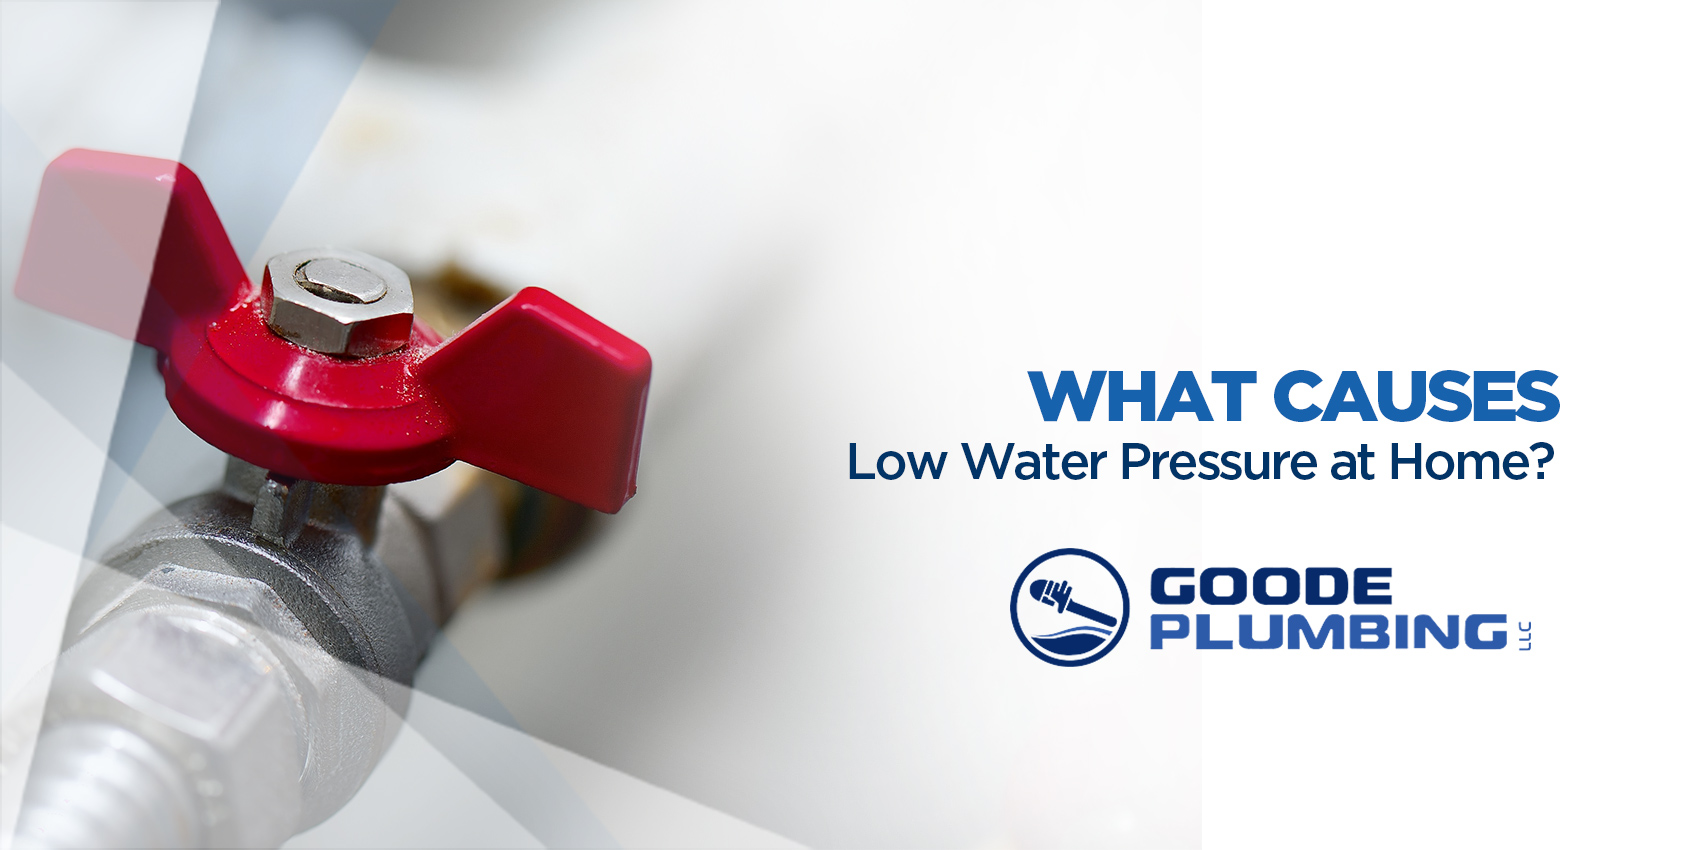 What Causes Low Water Pressure at Home?